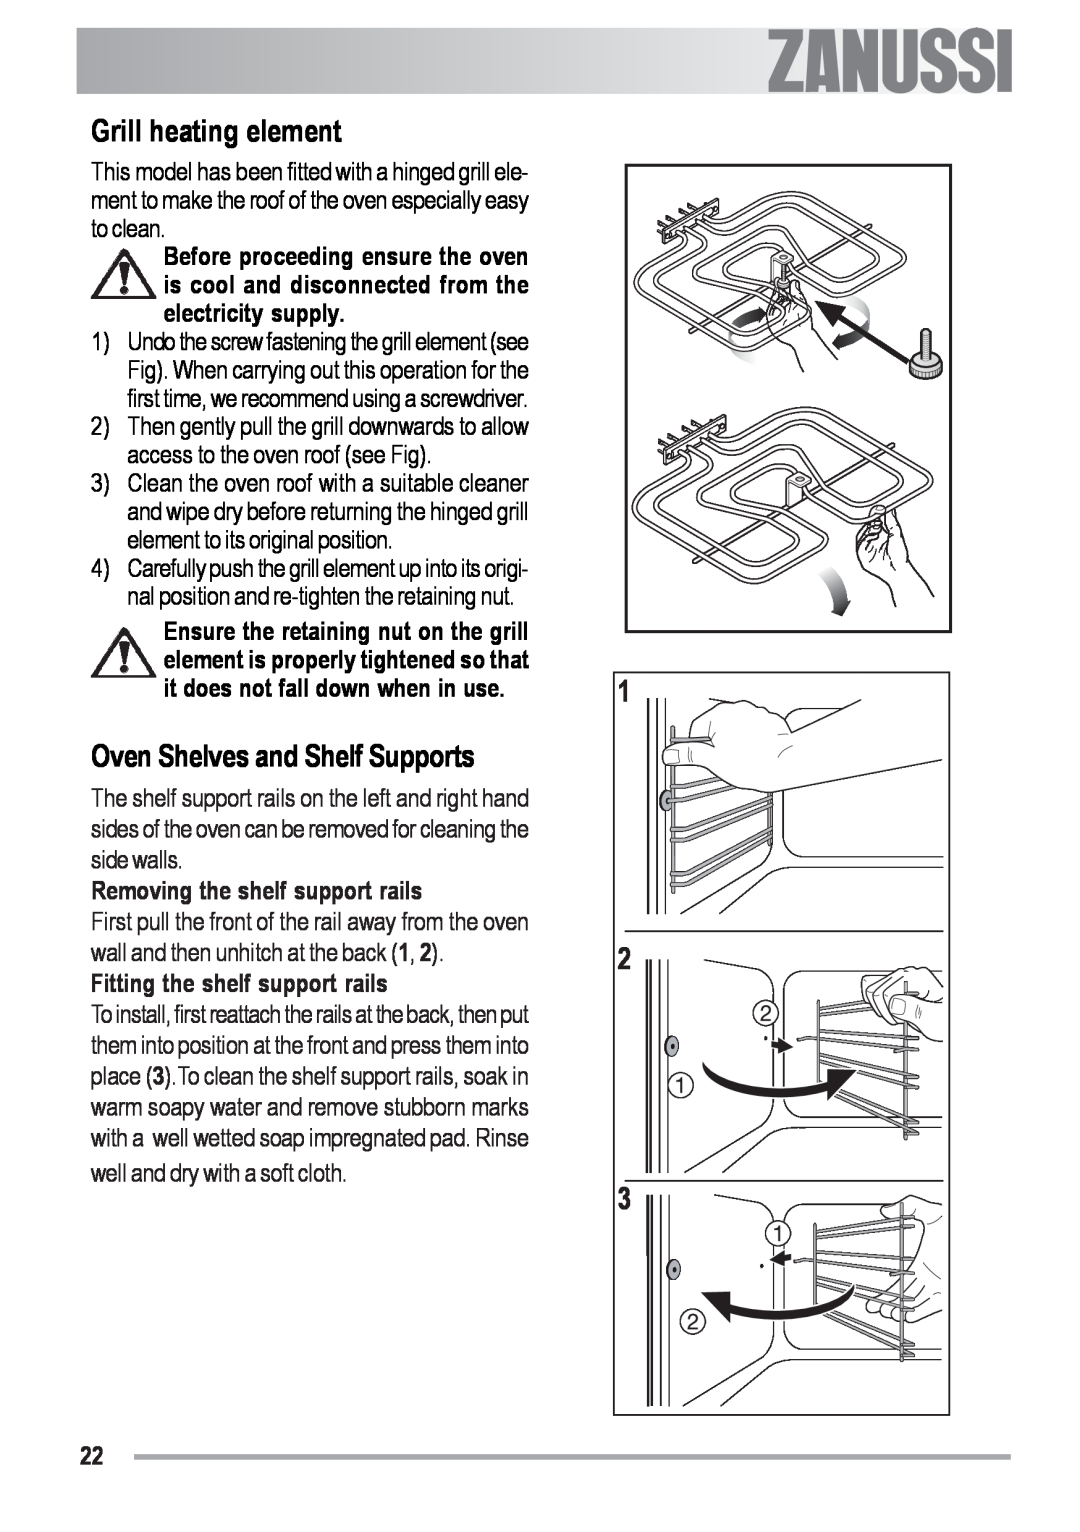 Zanussi ZOU 481 manual electrolux, Removing the shelf support rails, Fitting the shelf support rails, Grill heating element 